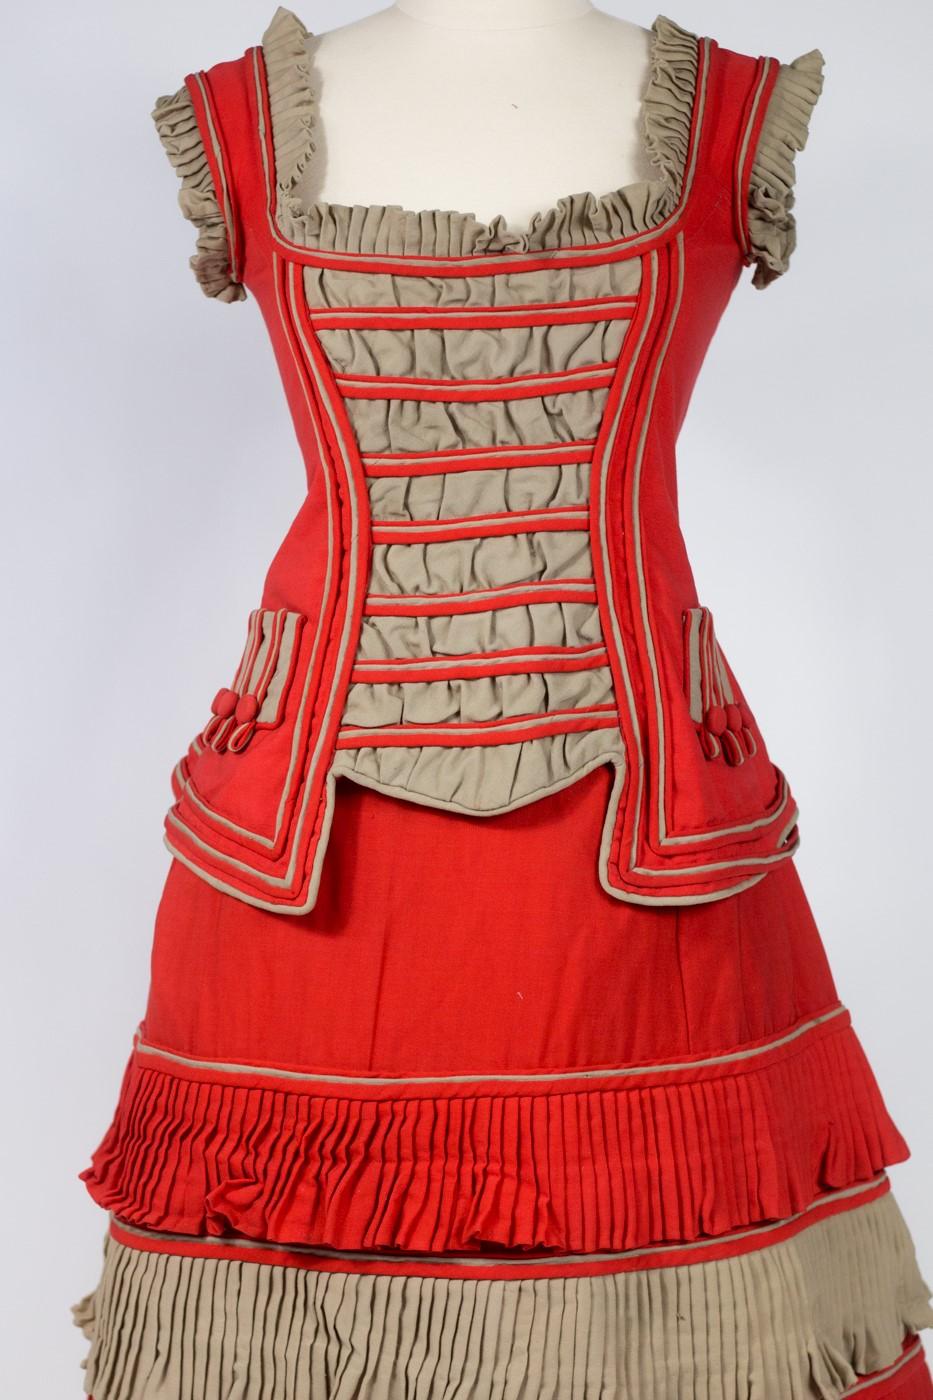 Circa 1890
United States

Fancy Dress, skirt and bodice for circus, sport (?) or simply American commemoration (?) in vermilion red and grey woolen cheesecloth. Dress in two parts, sleeveless bodice, boat neckline, buttoning in front and cream